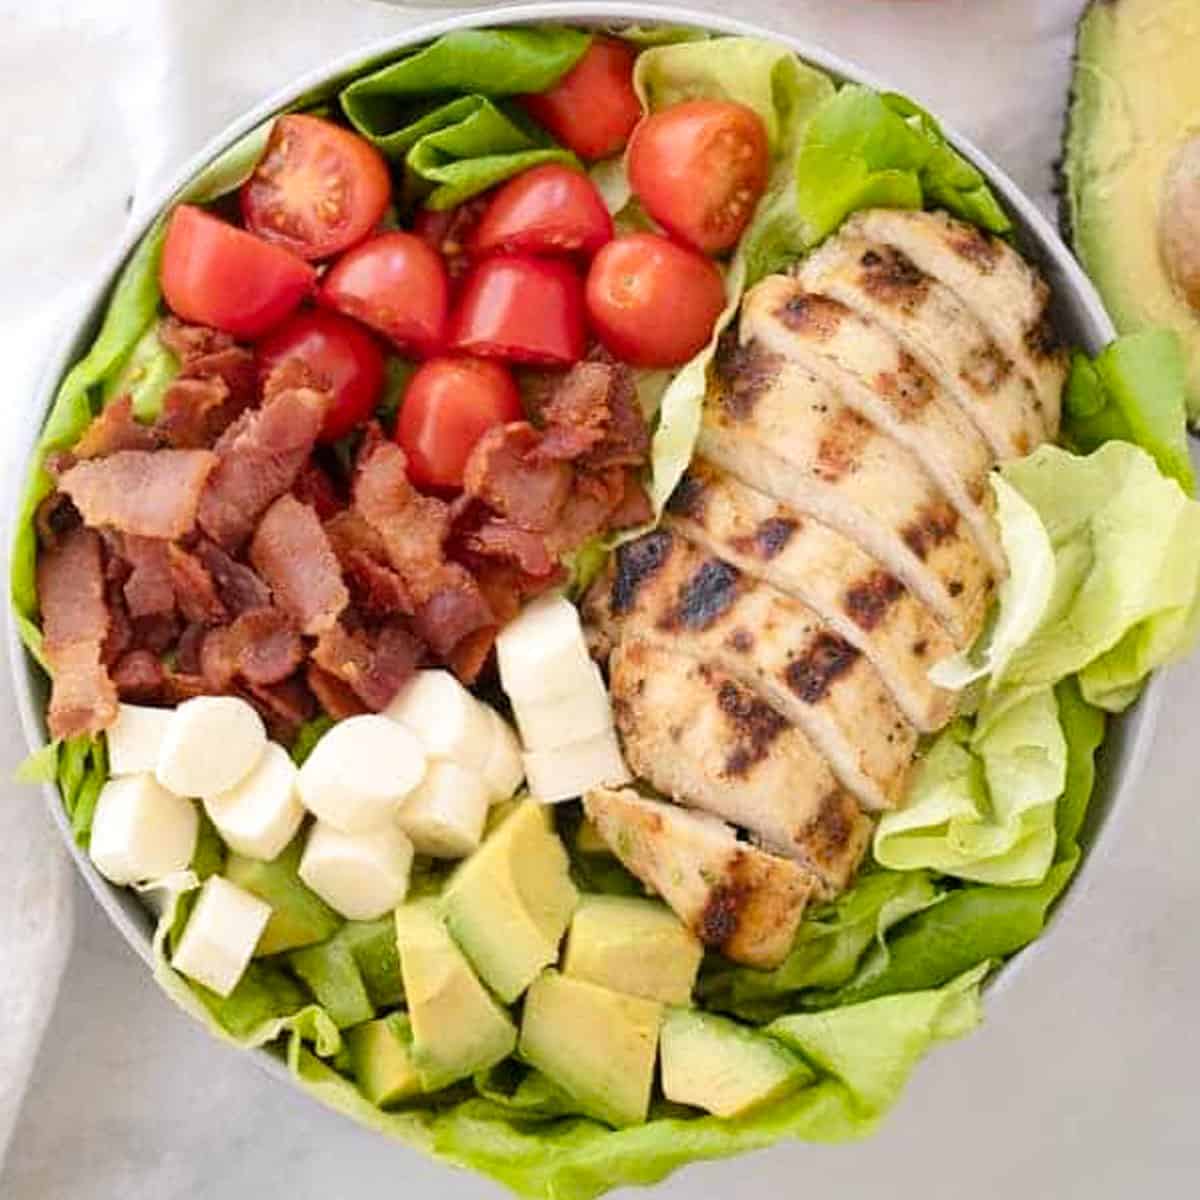 healthy grilled chicken BLT salad recipe with pesto ranch dressing